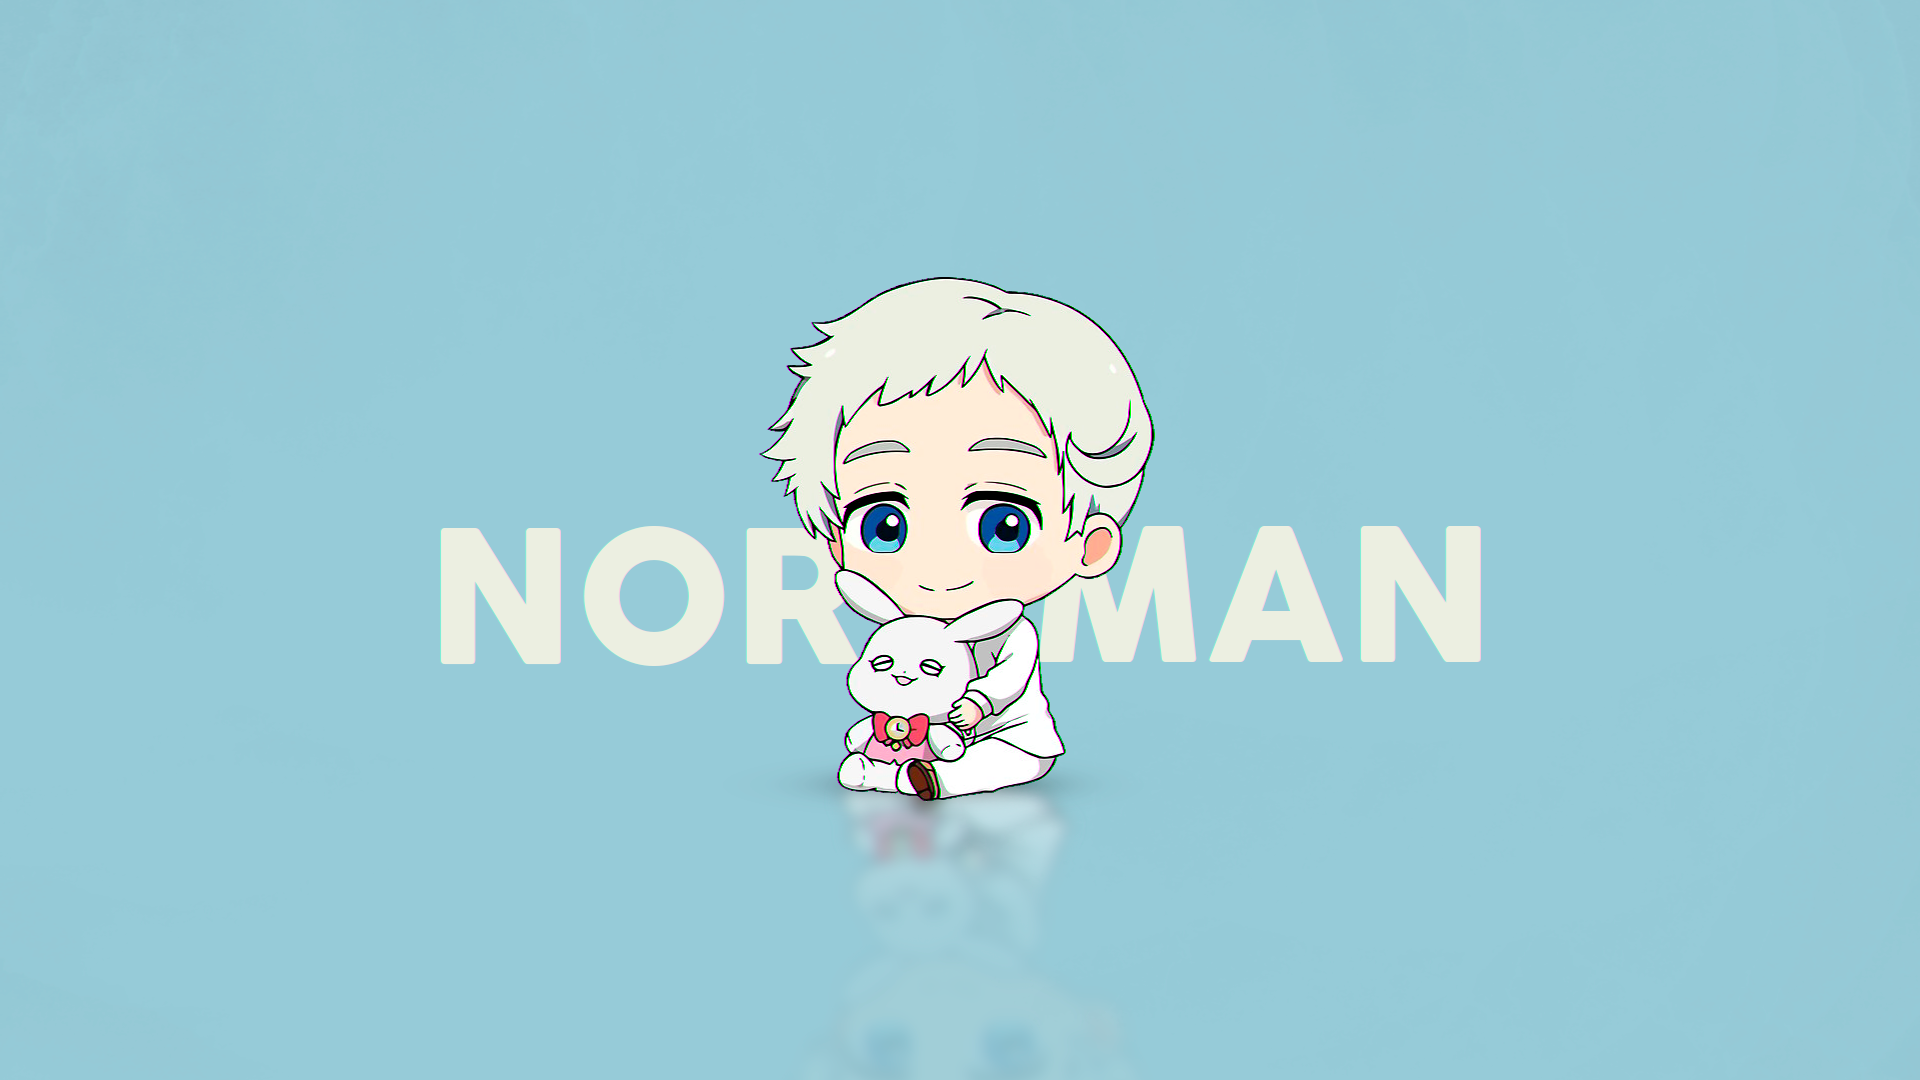 Anime 1920x1080 Norman (The Promised Neverland) The Promised Neverland chibi anime boys